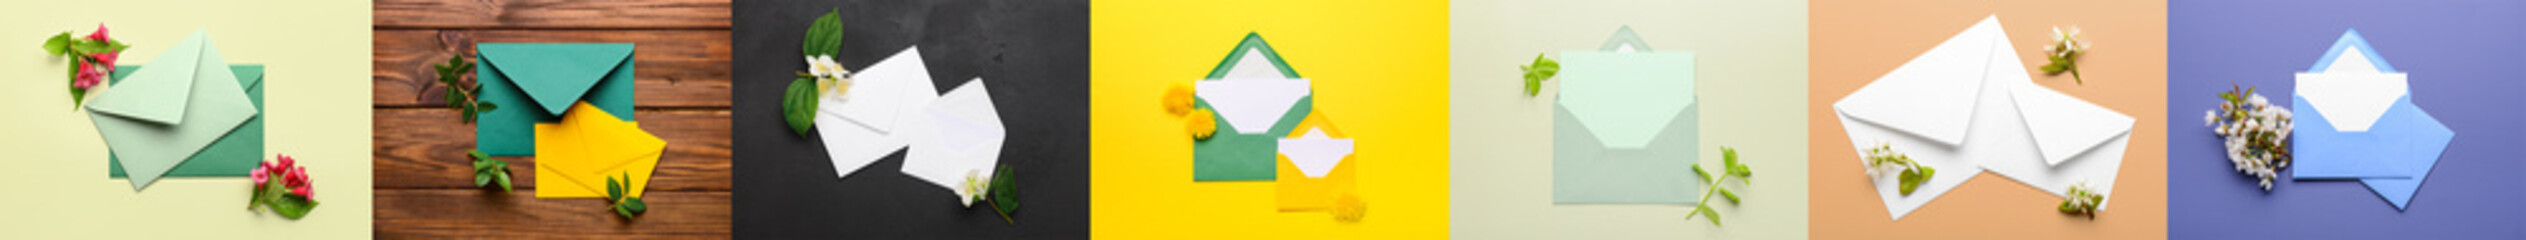 Collage with envelopes and flowers on color background, top view